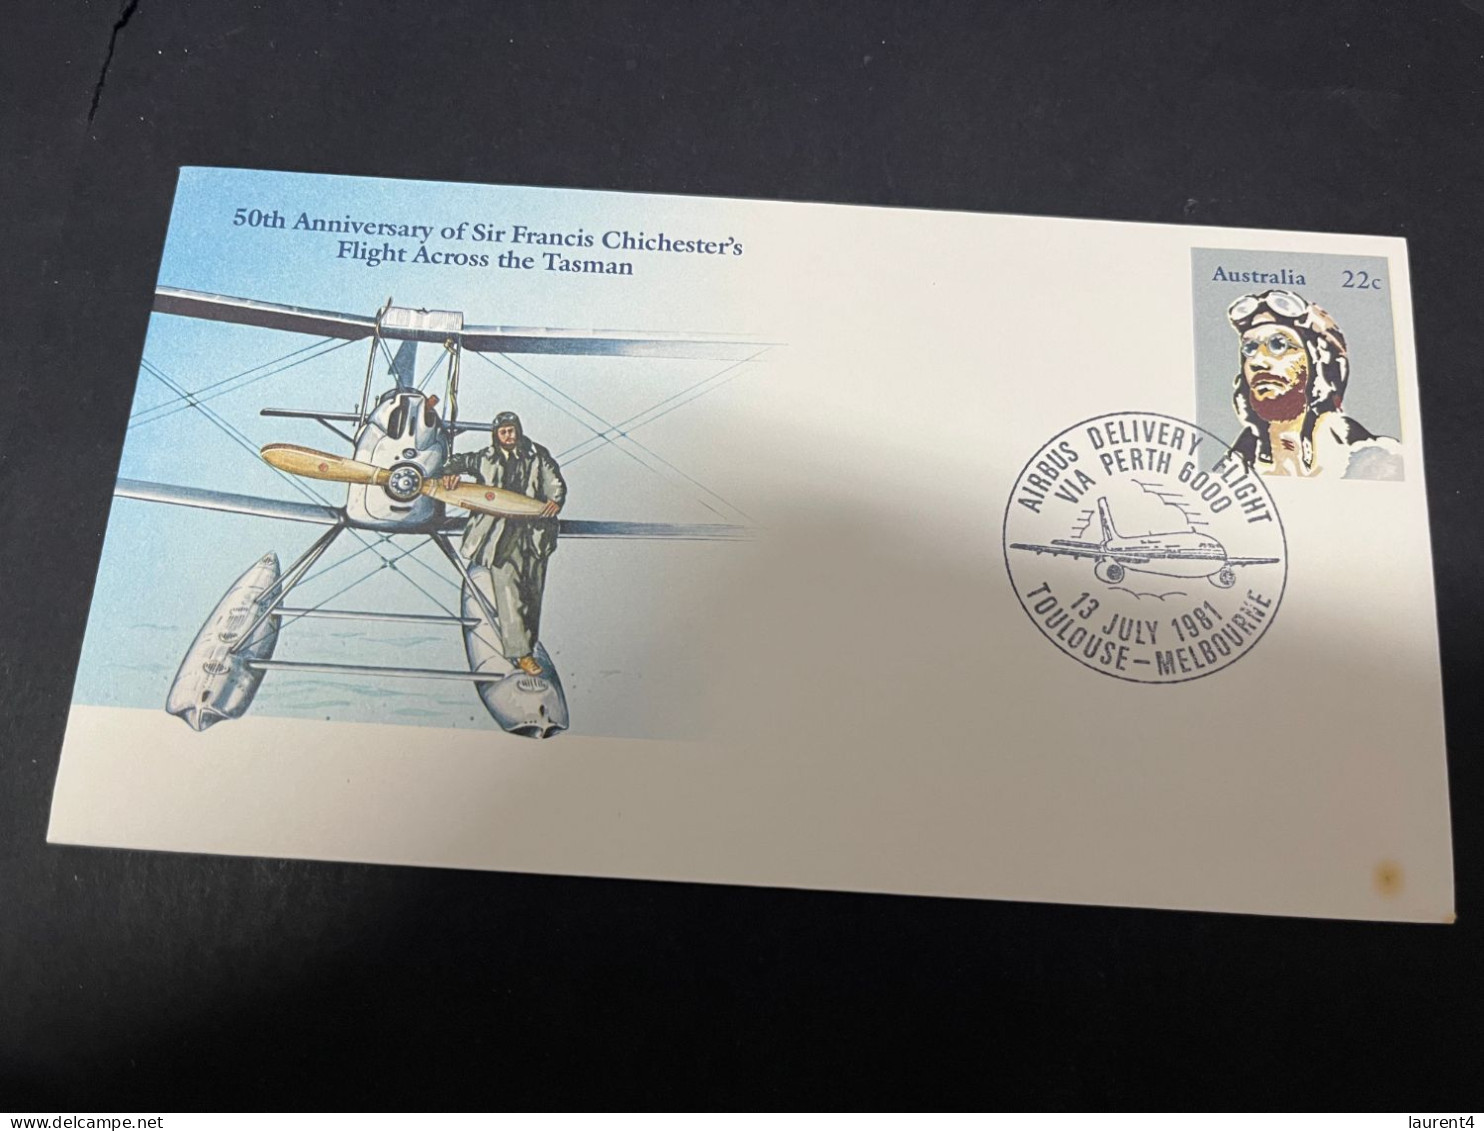 30-4-2023 (3 Z 29) Australia FDC (1 Cover) 1981 - 50th Anniversary Francis Chichesters (Airbus Delivery Via Perh) - Omslagen Van Eerste Dagen (FDC)